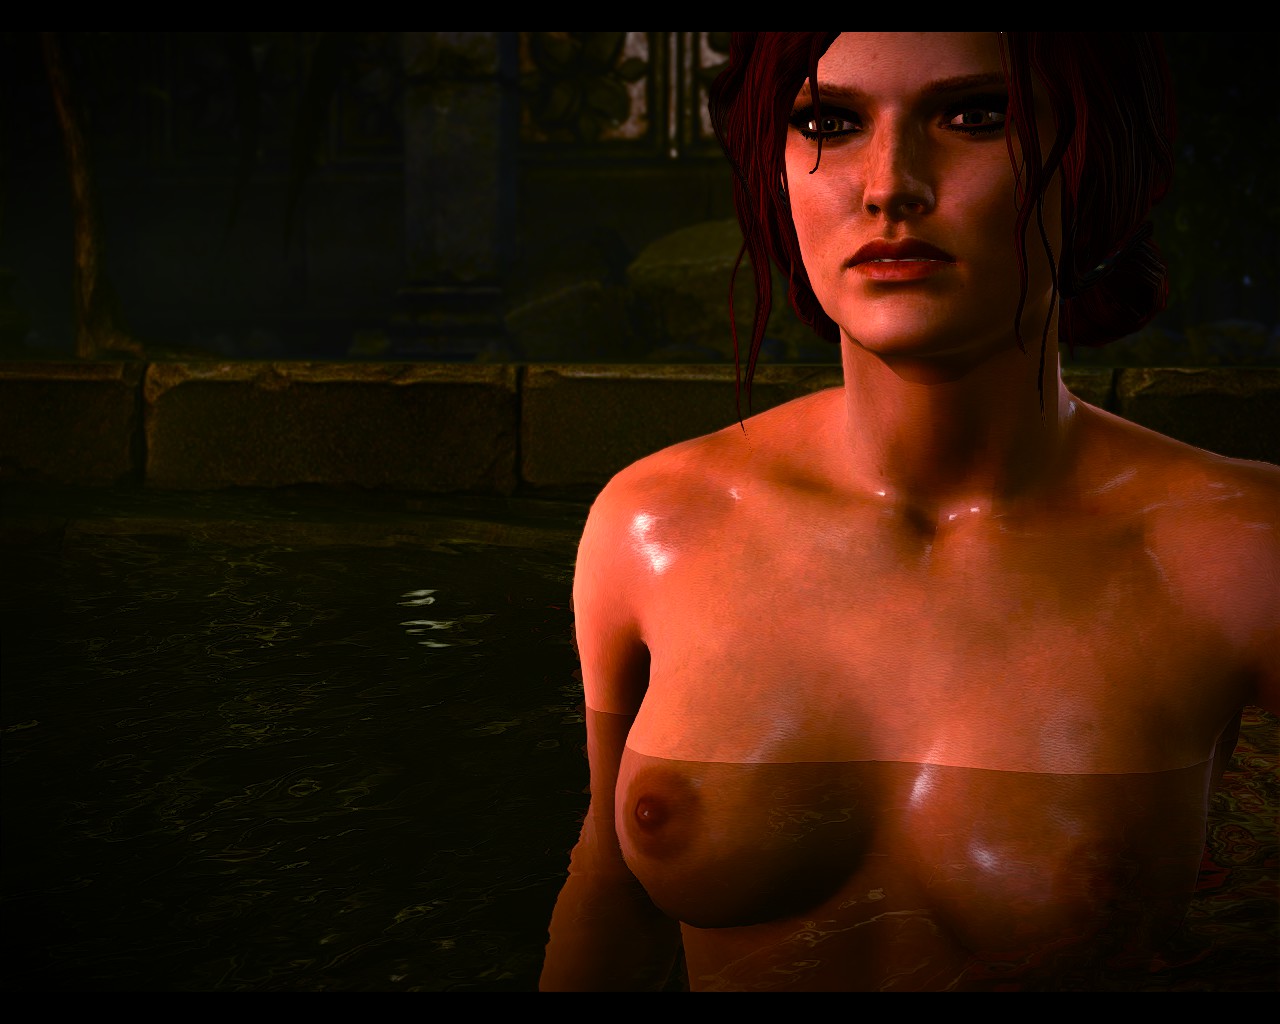 Pics showing for free -Witcher 2 triss merigold nude. nude triss merigold W...